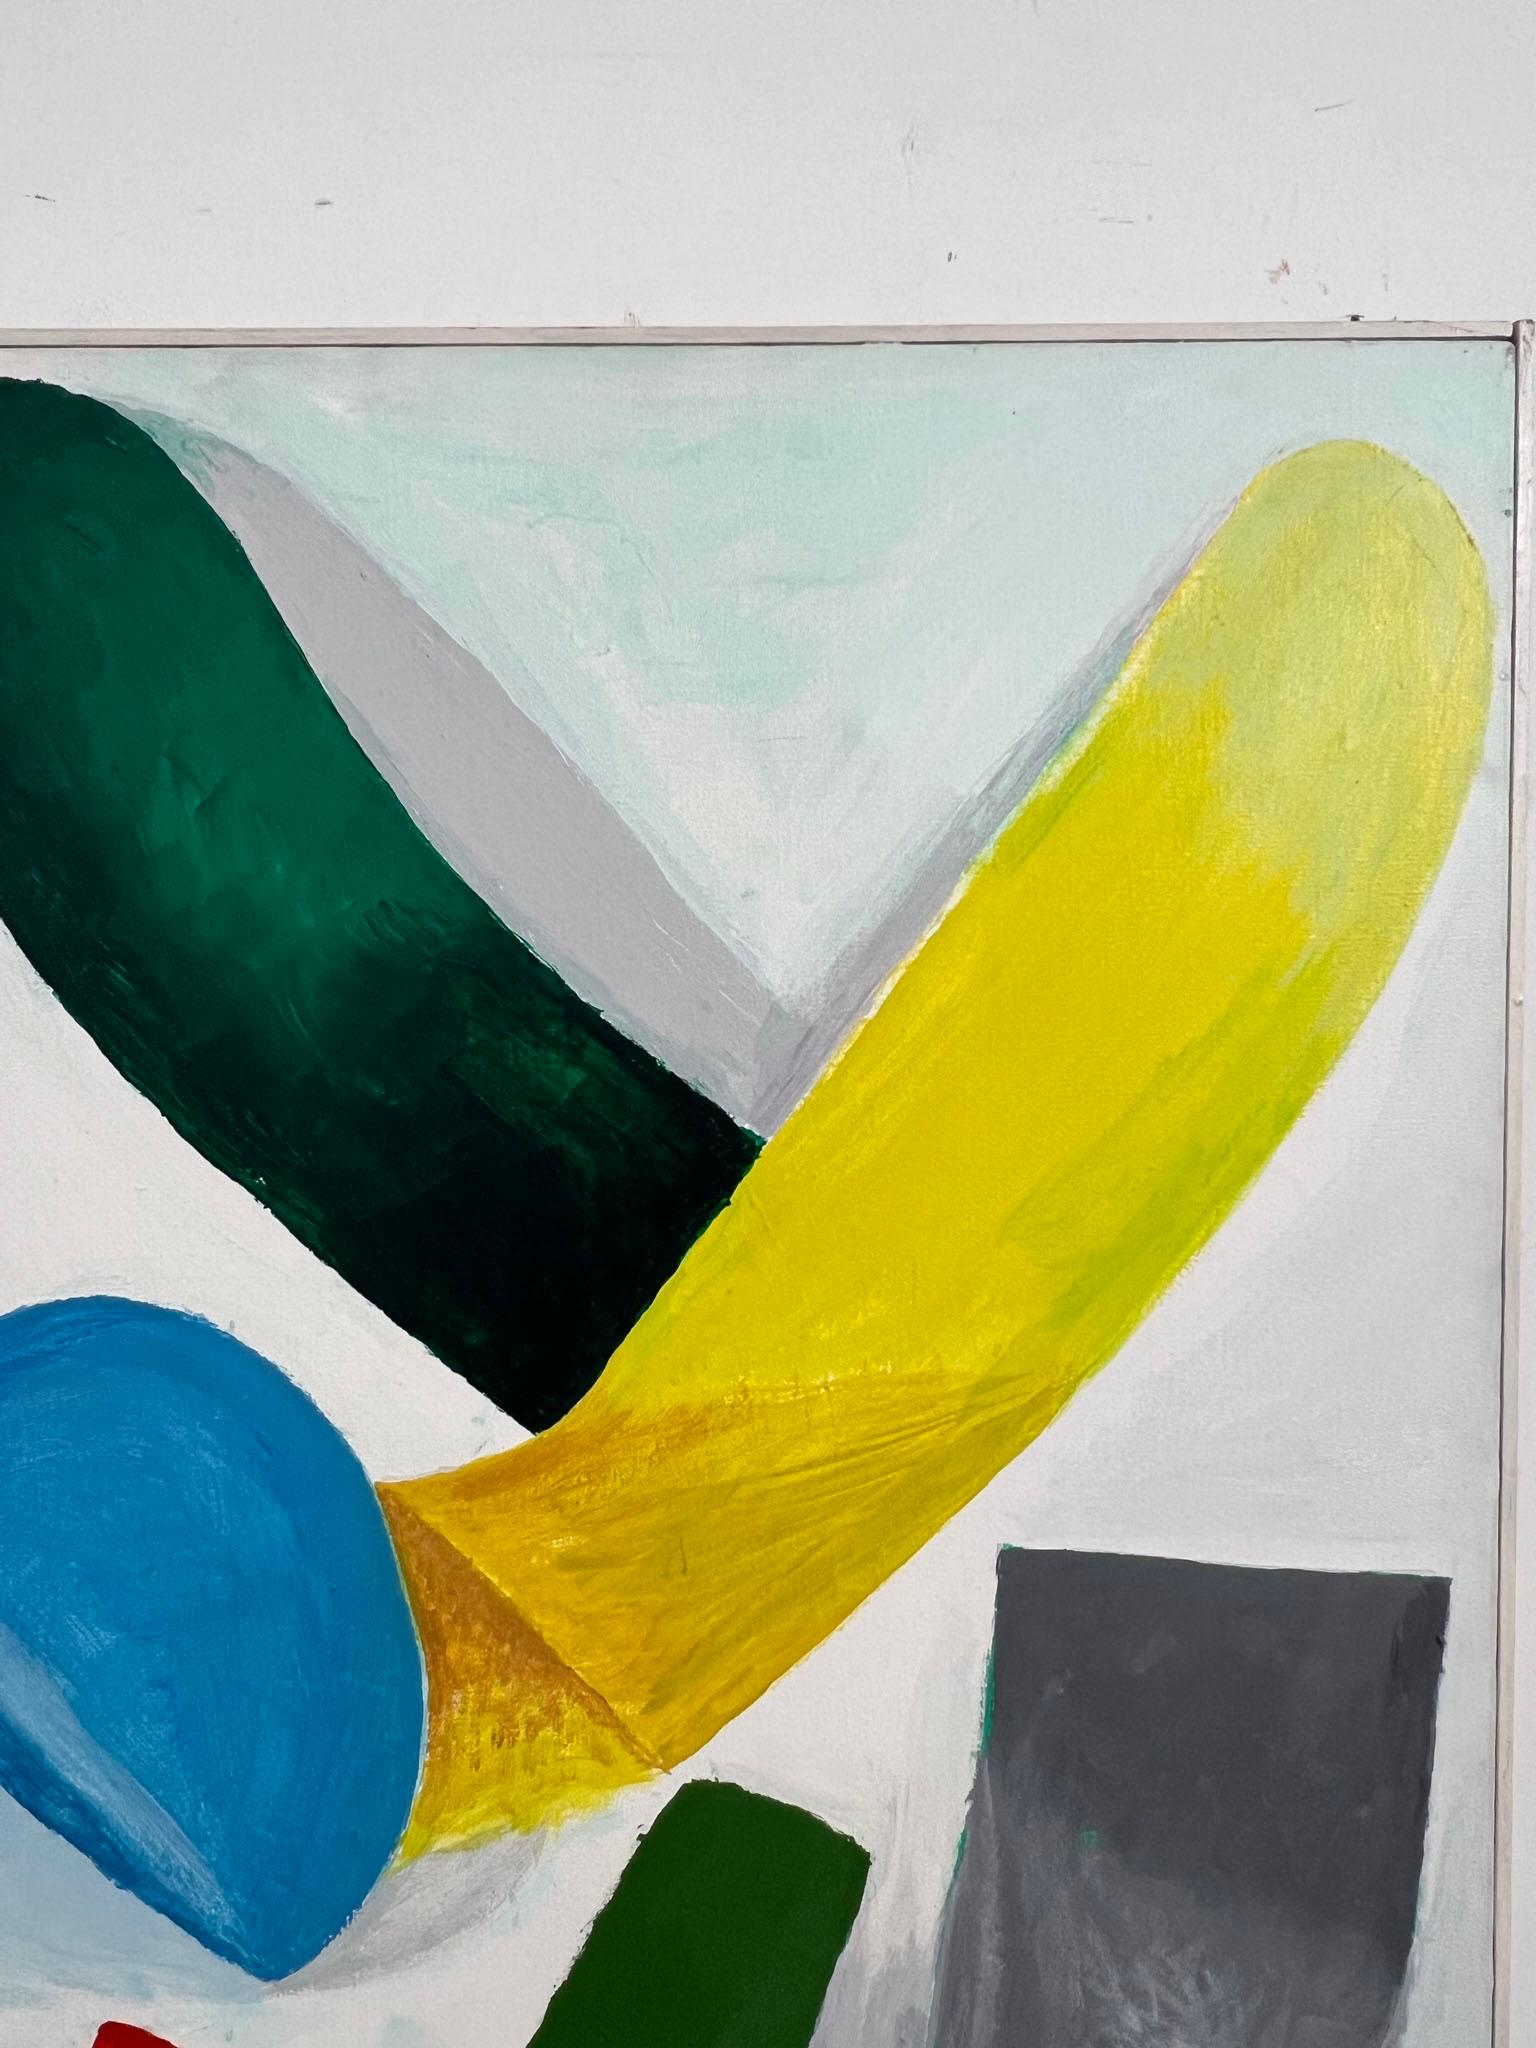 A modernist composition on canvas of colorful ribboned shapes dated 1973 by the late Bethesda, MD artist Irving Schultz.